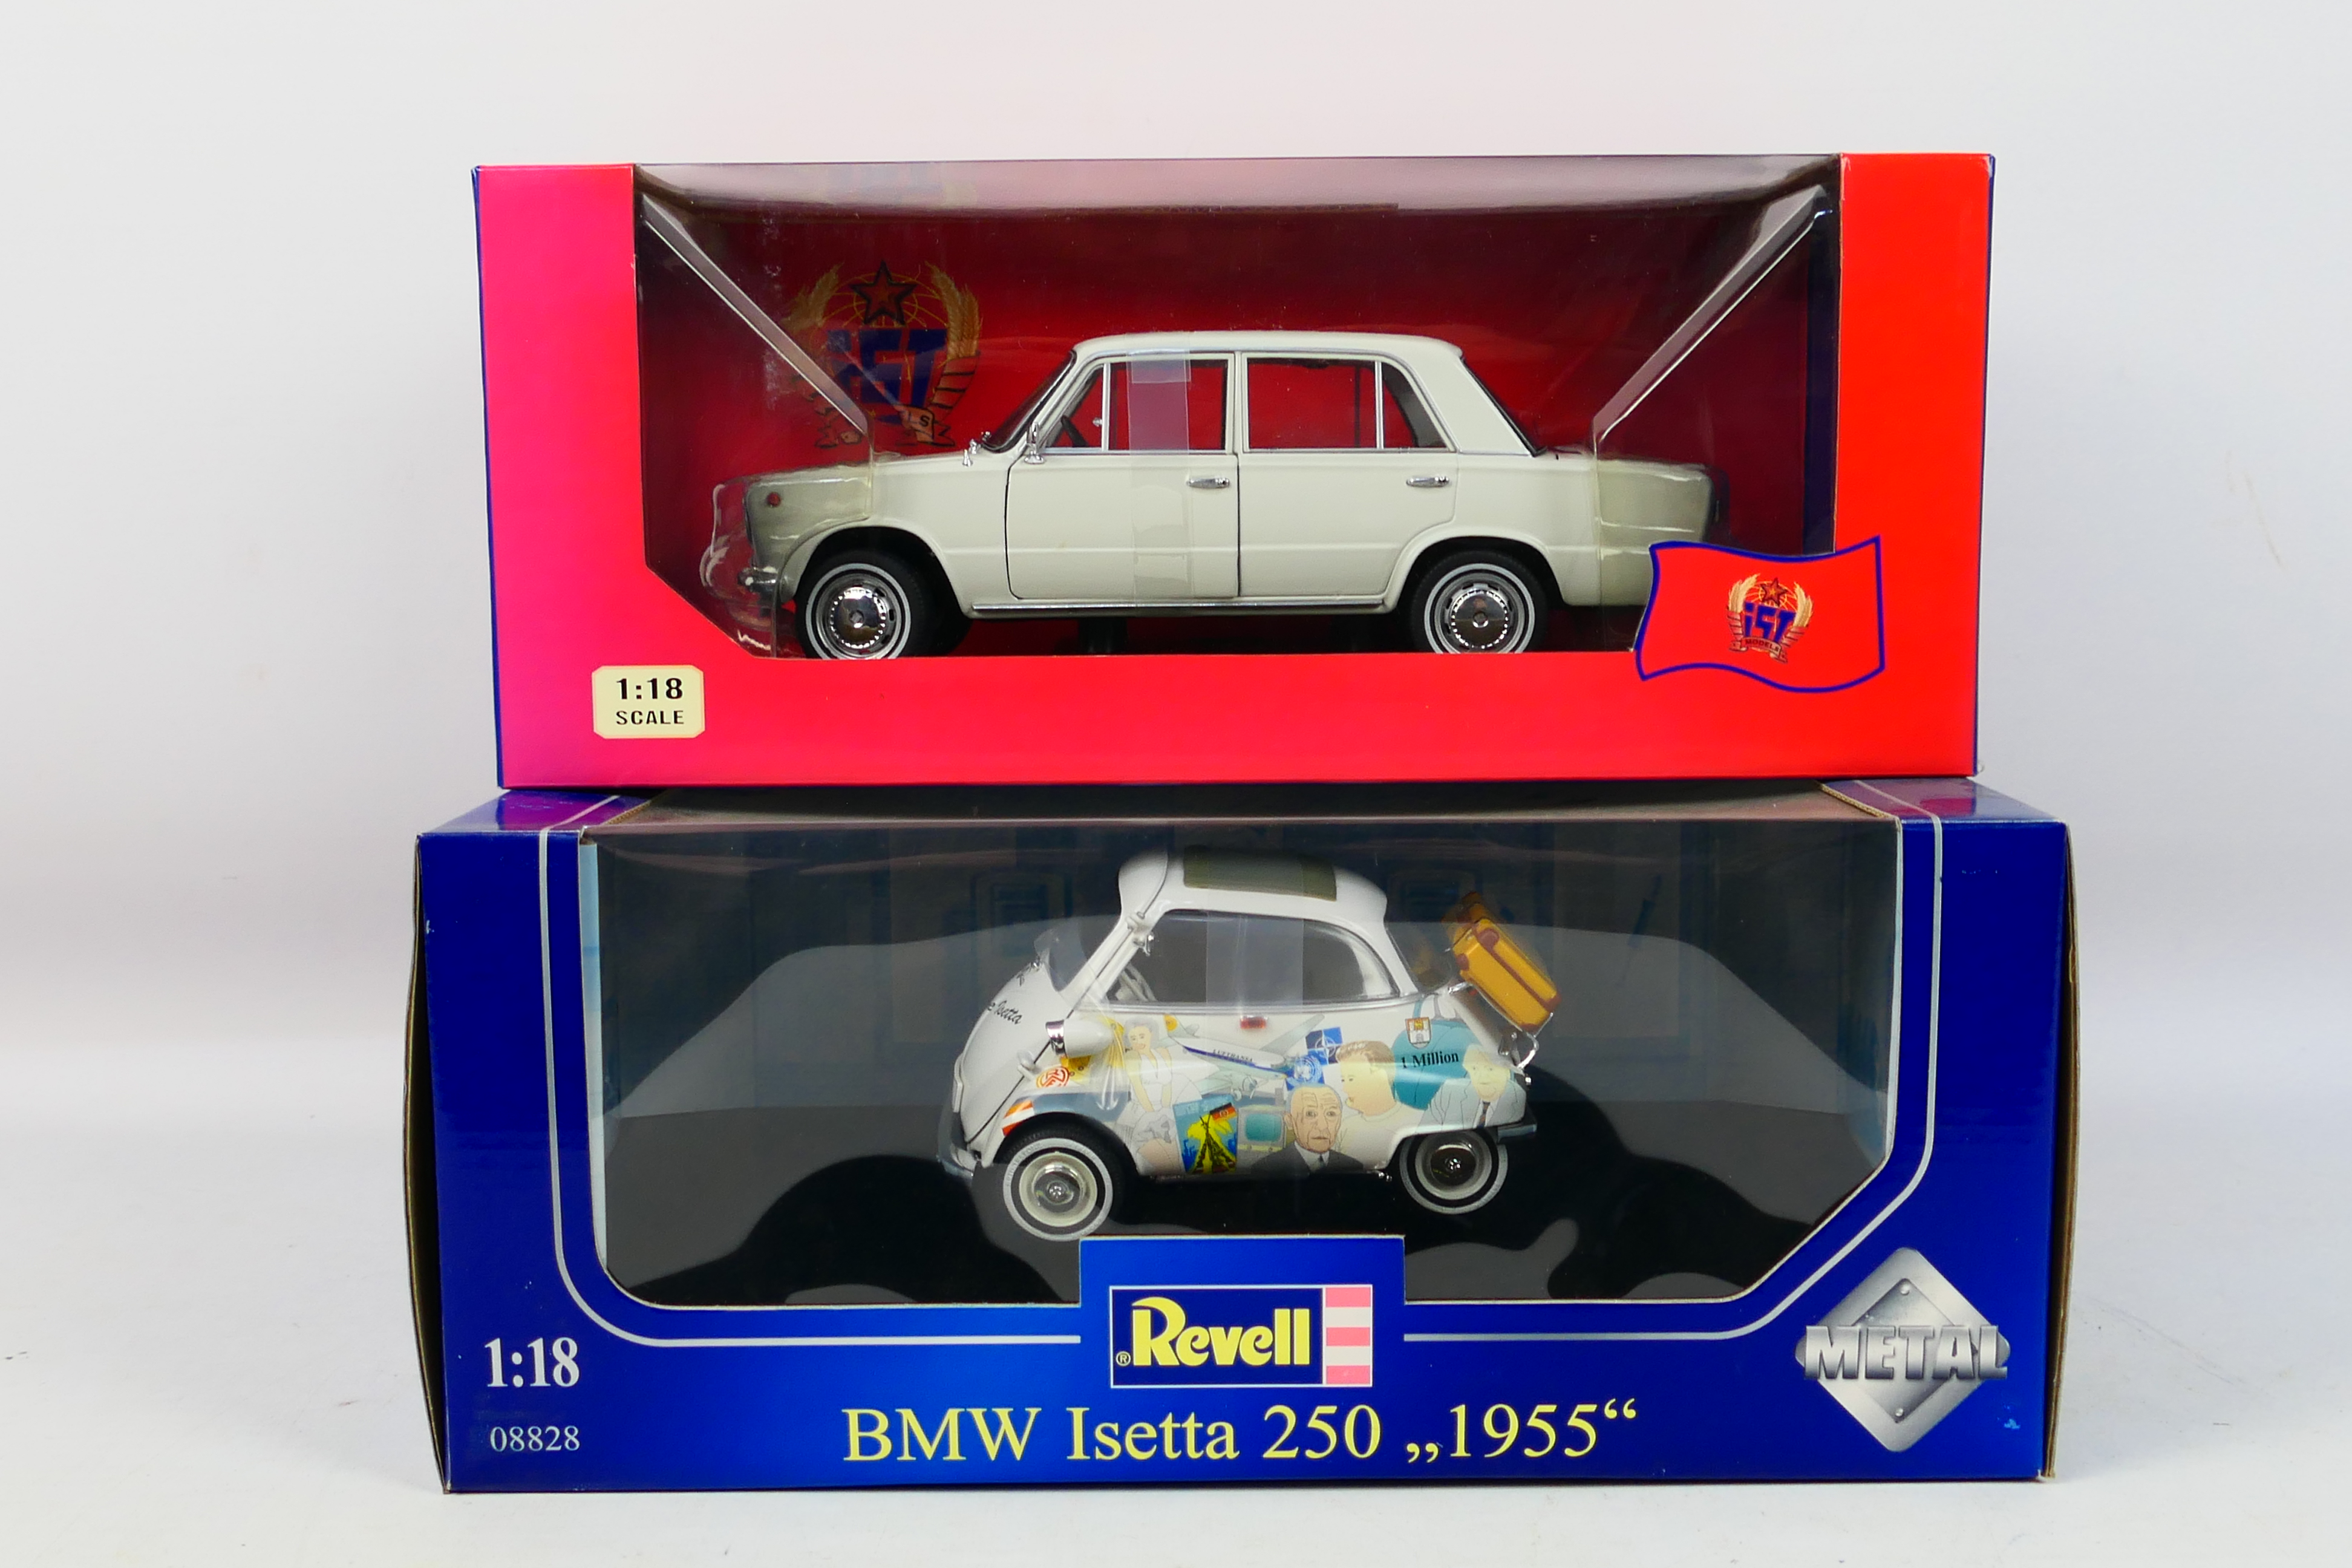 Revell - IST Models - Two boxed 1:18 scale diecast model vehicles.